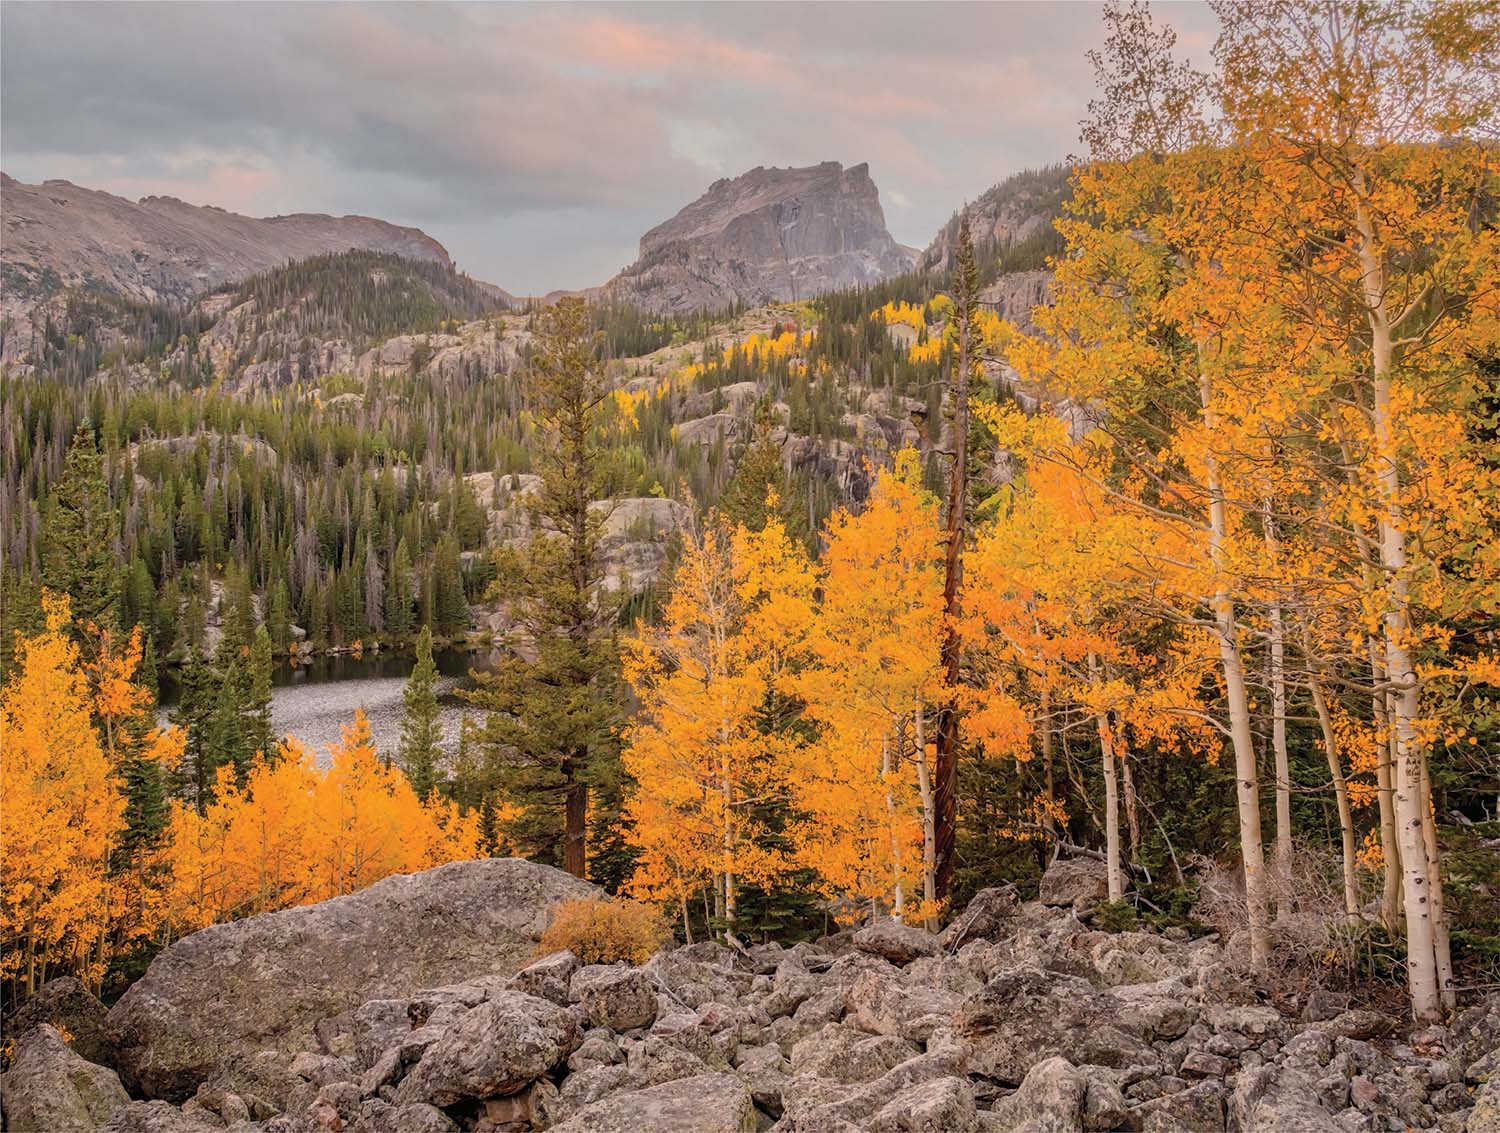 Rocky Mountain National Park Photography Jigsaw Puzzle